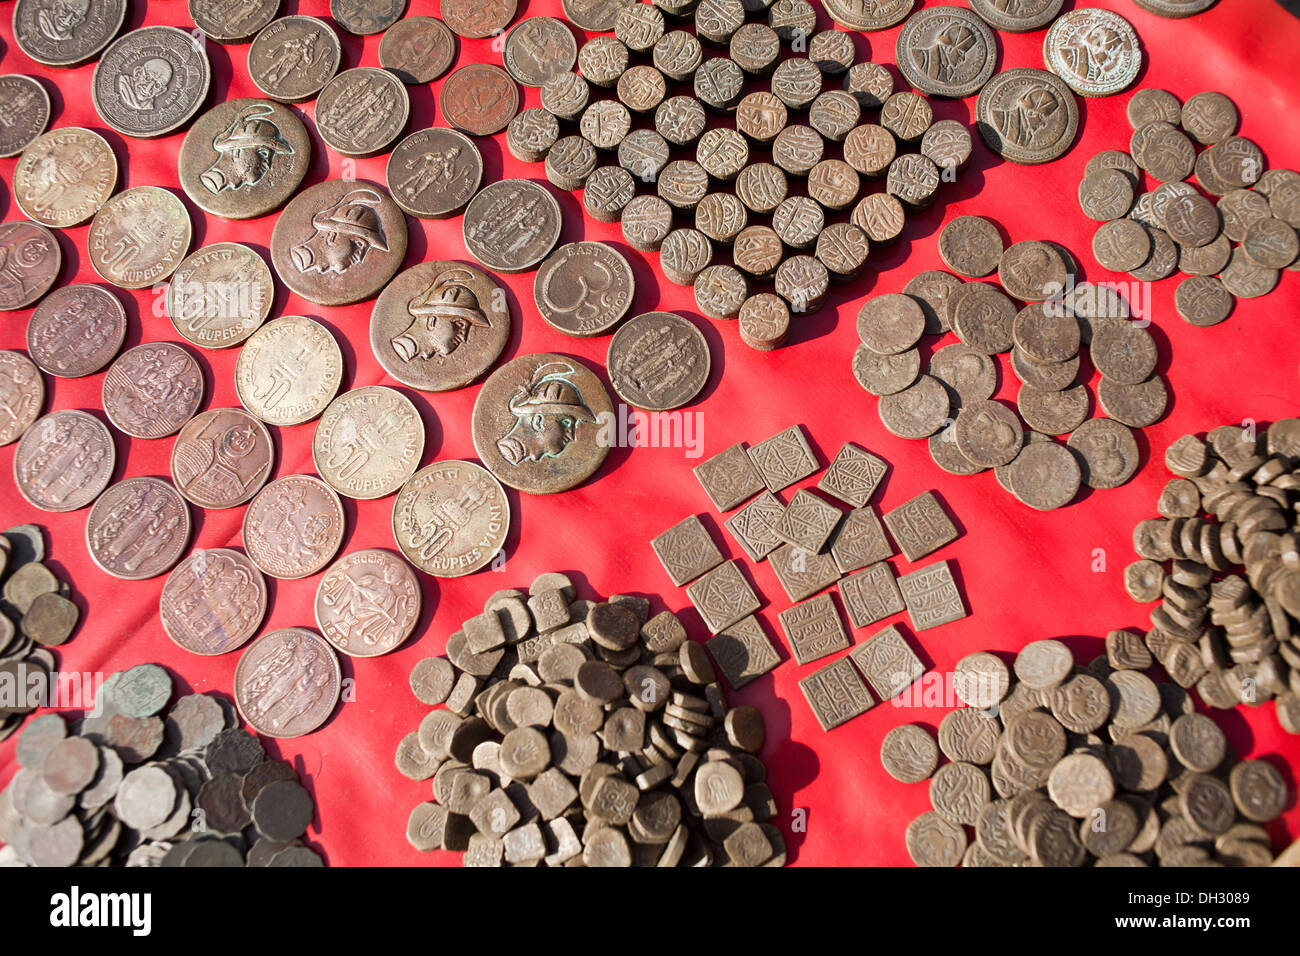 ancient old antique coins for sale at rishikesh uttarakhand india DH3089